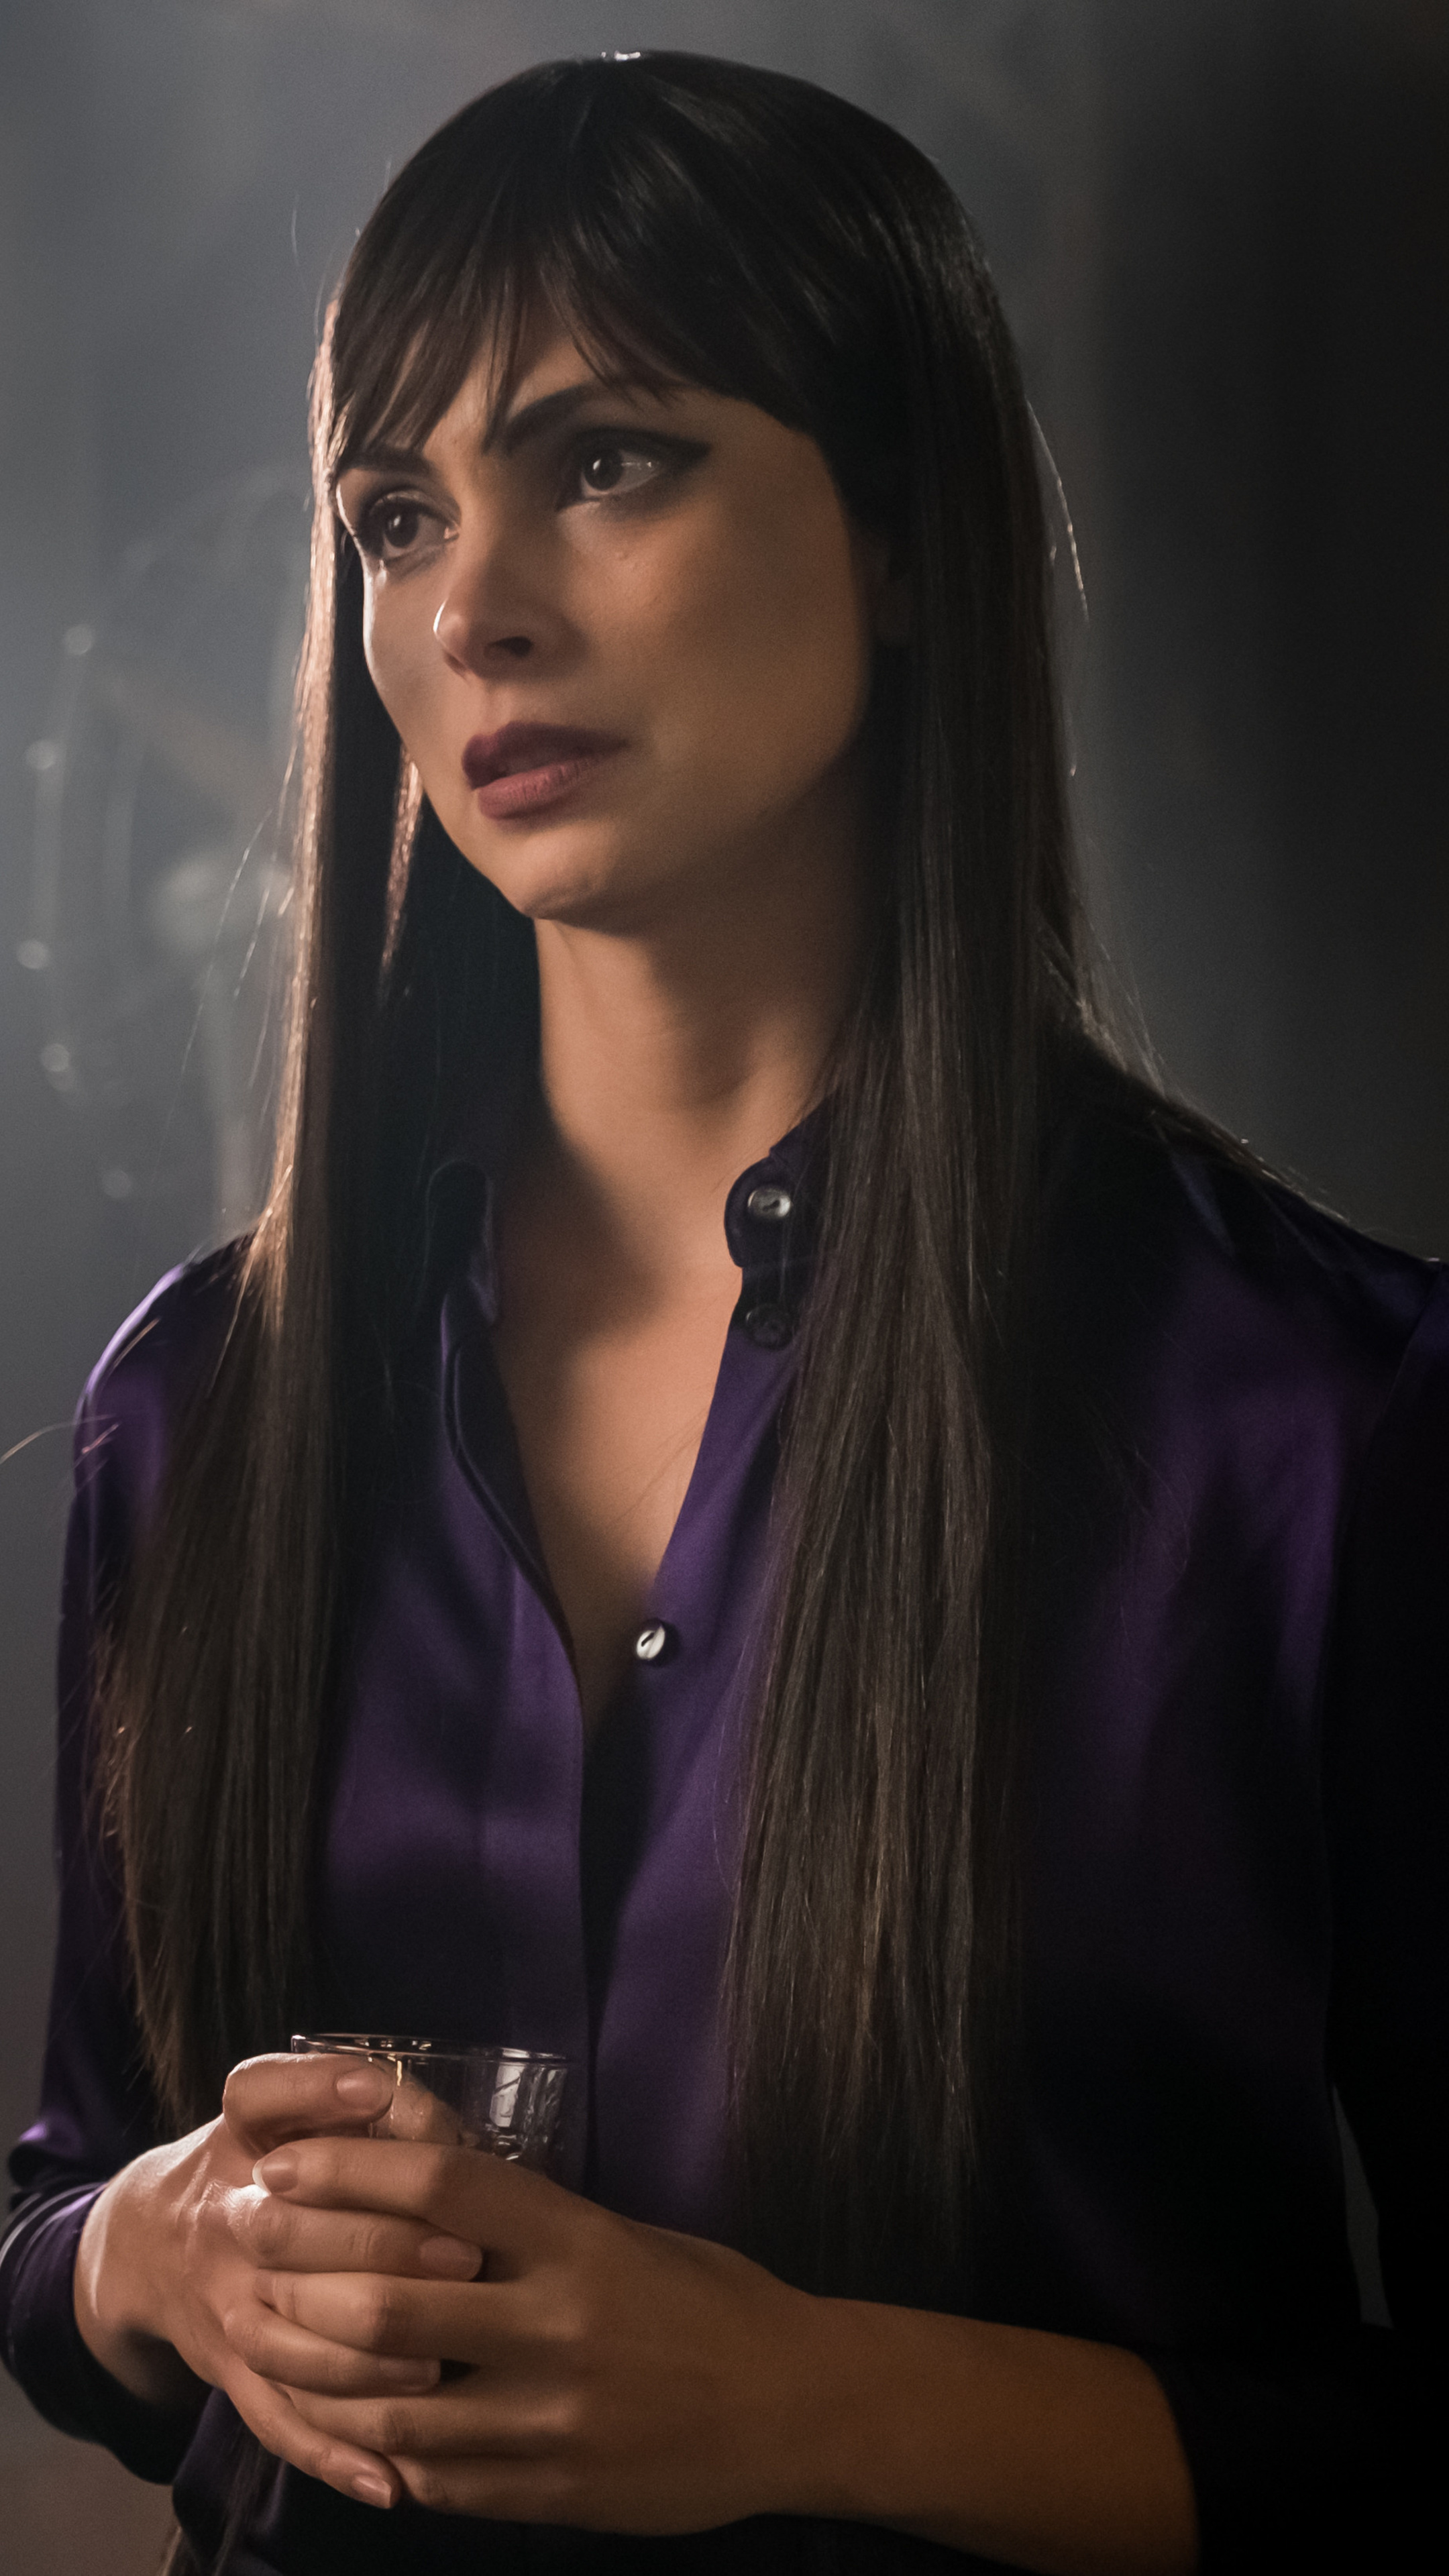 Gotham TV Series, Morena Baccarin, Sony Xperia smartphones, HD wallpapers, 2160x3840 4K Handy